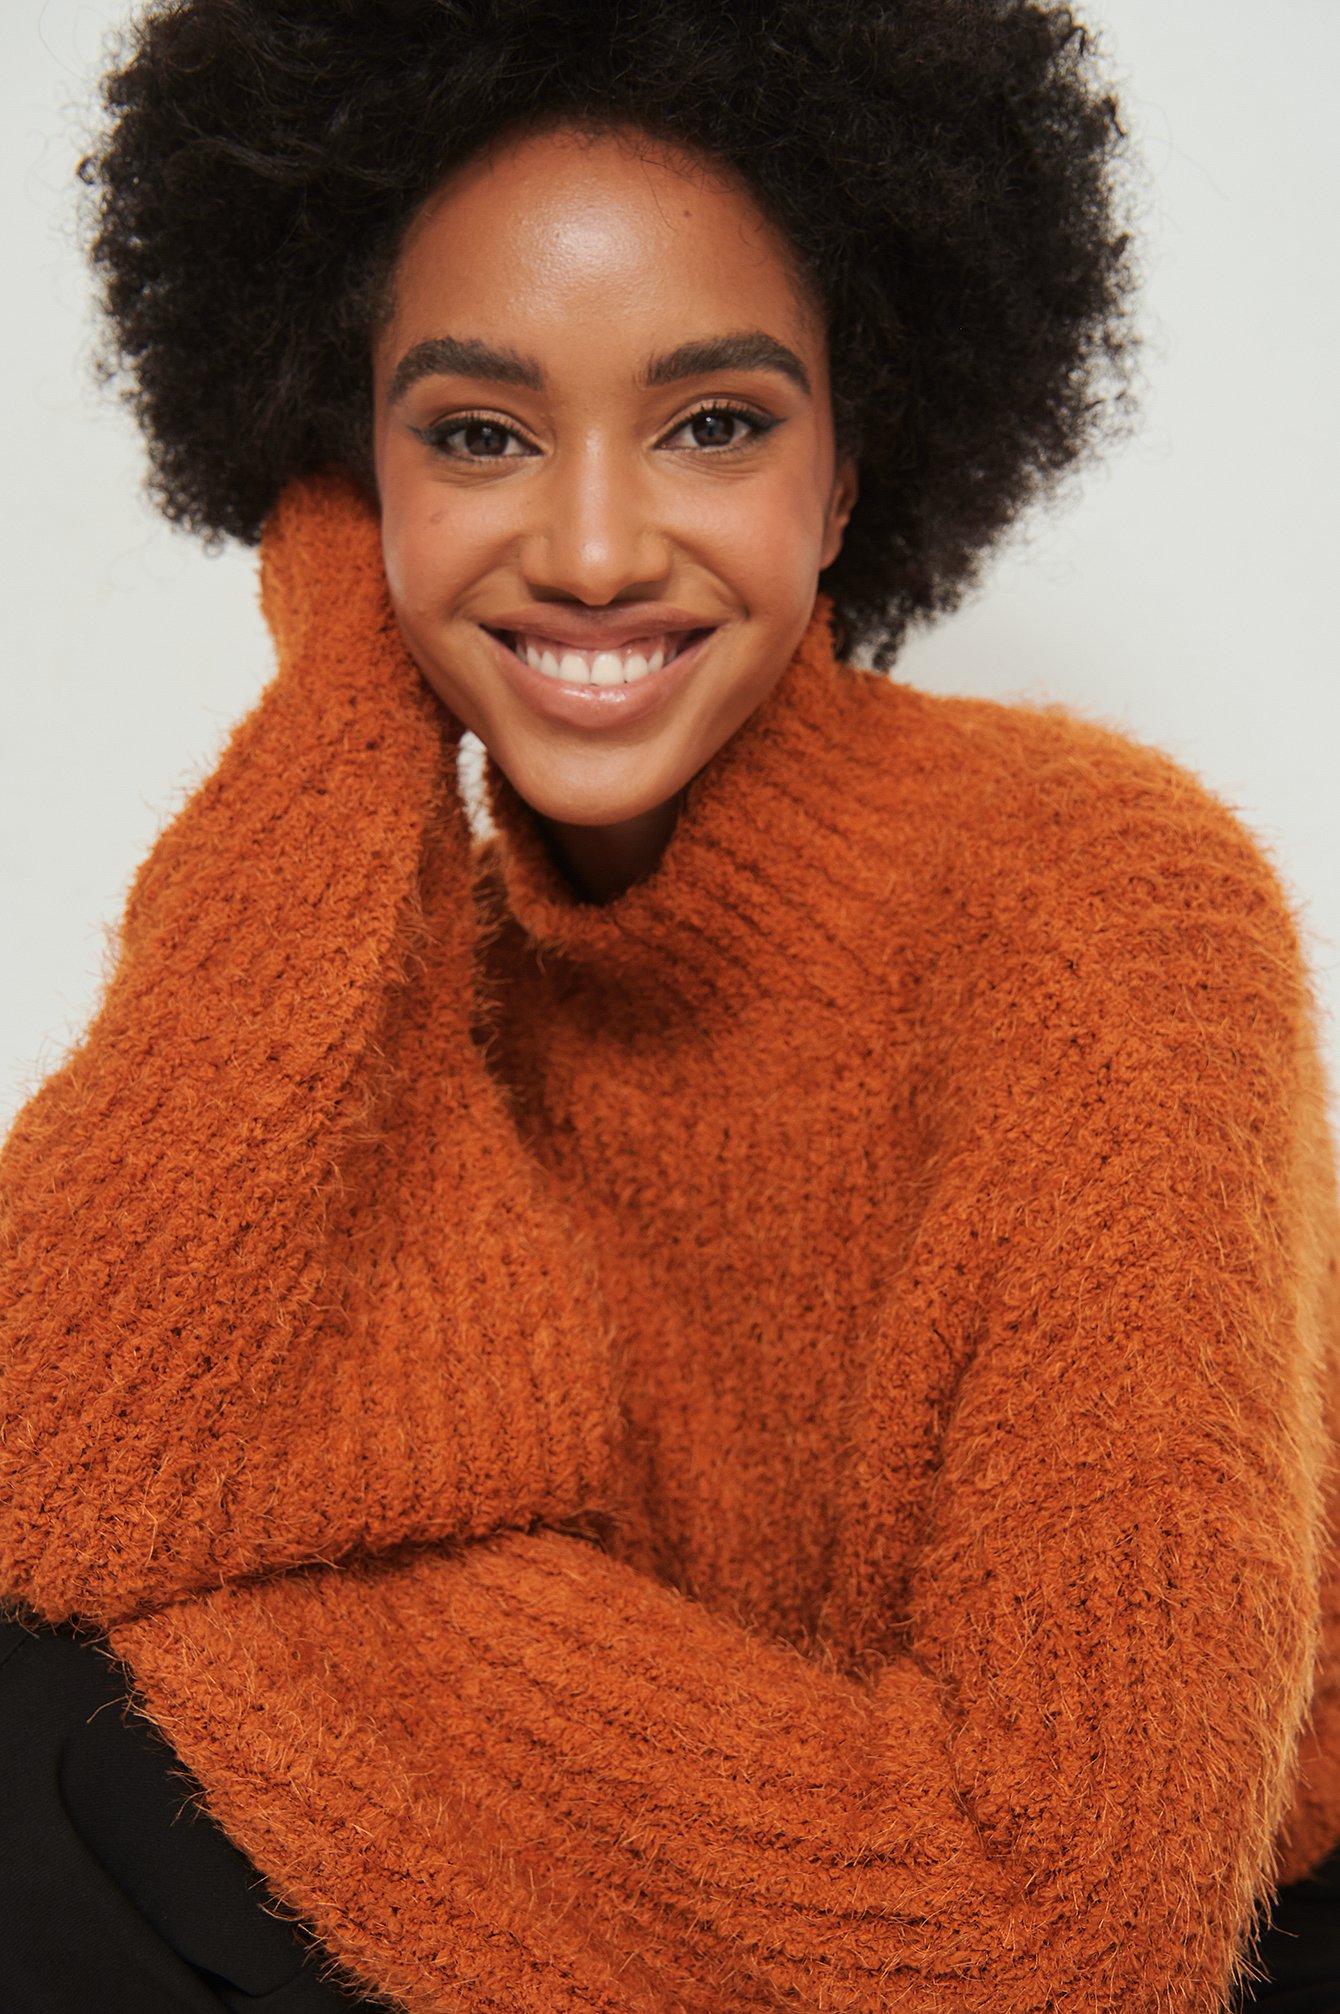 Rust Fluffy Knitted Sweater